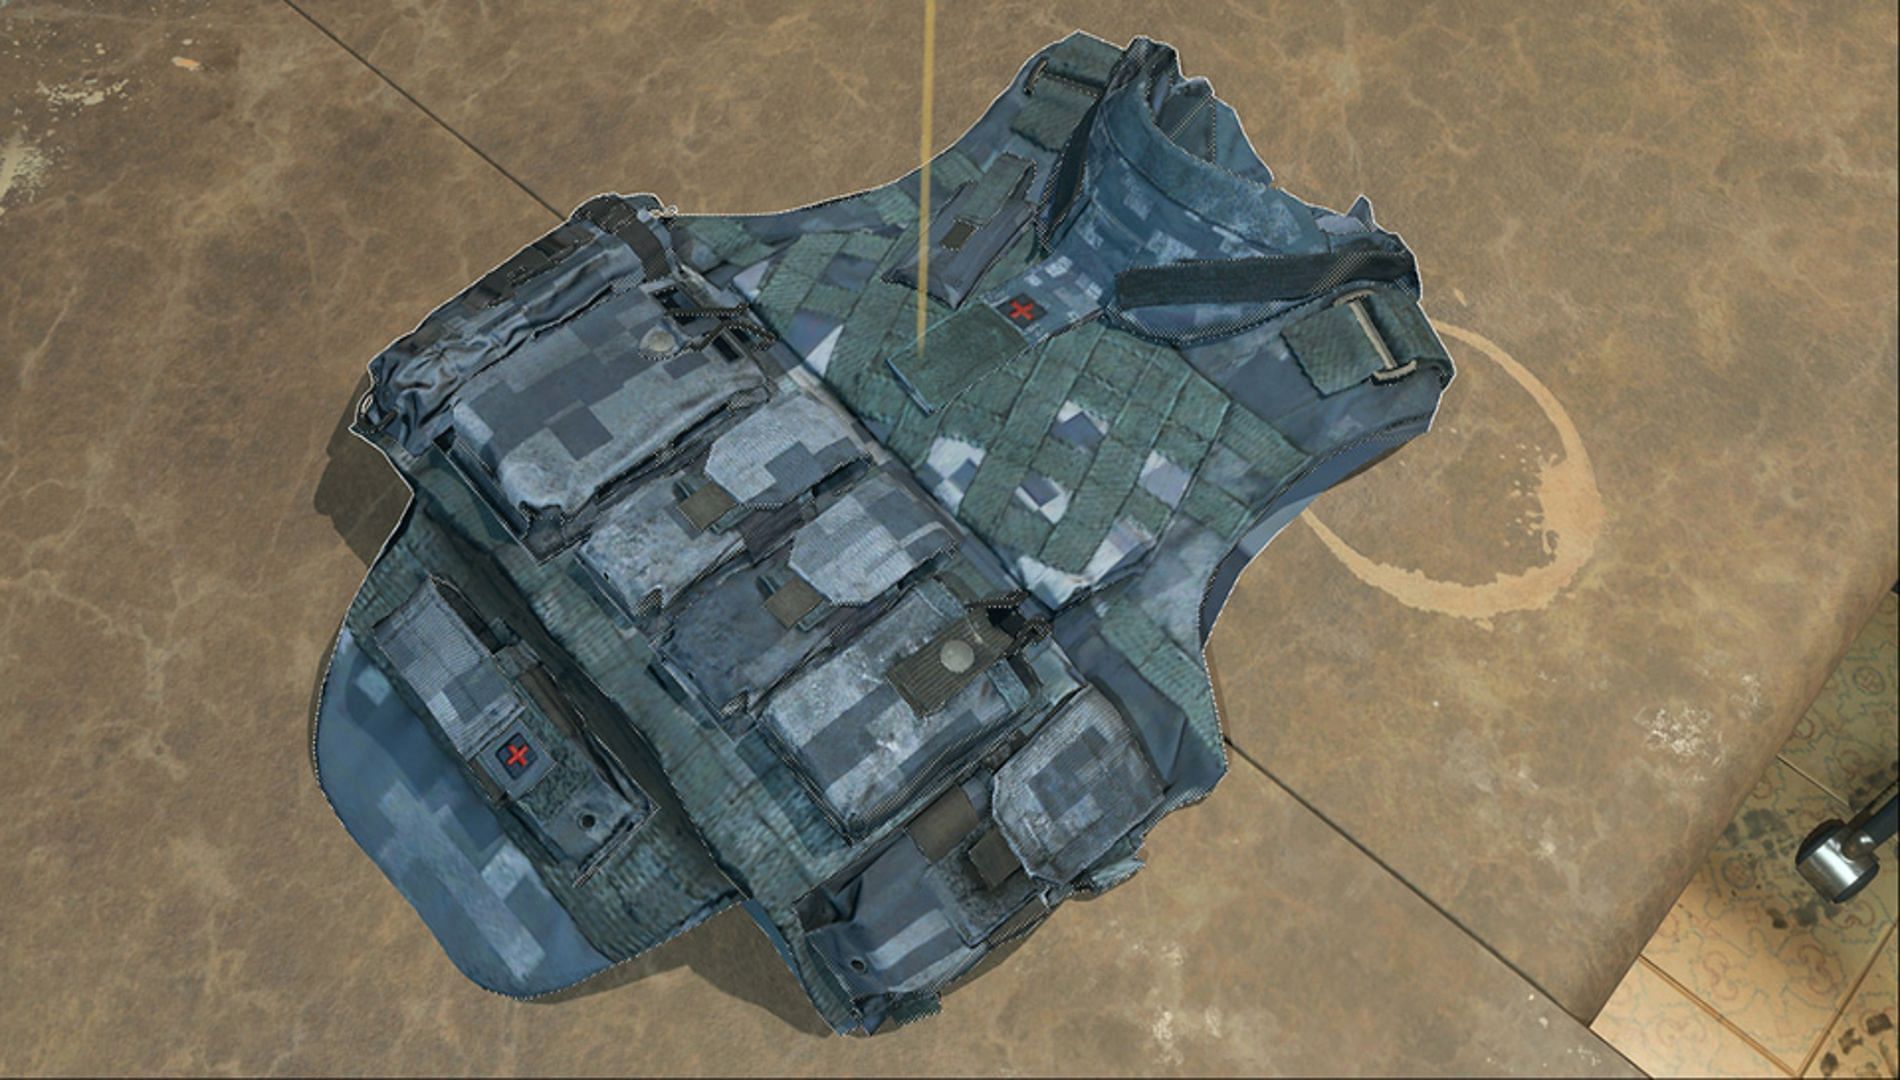 Tempered plate carrier in DMZ (Image via Activision)